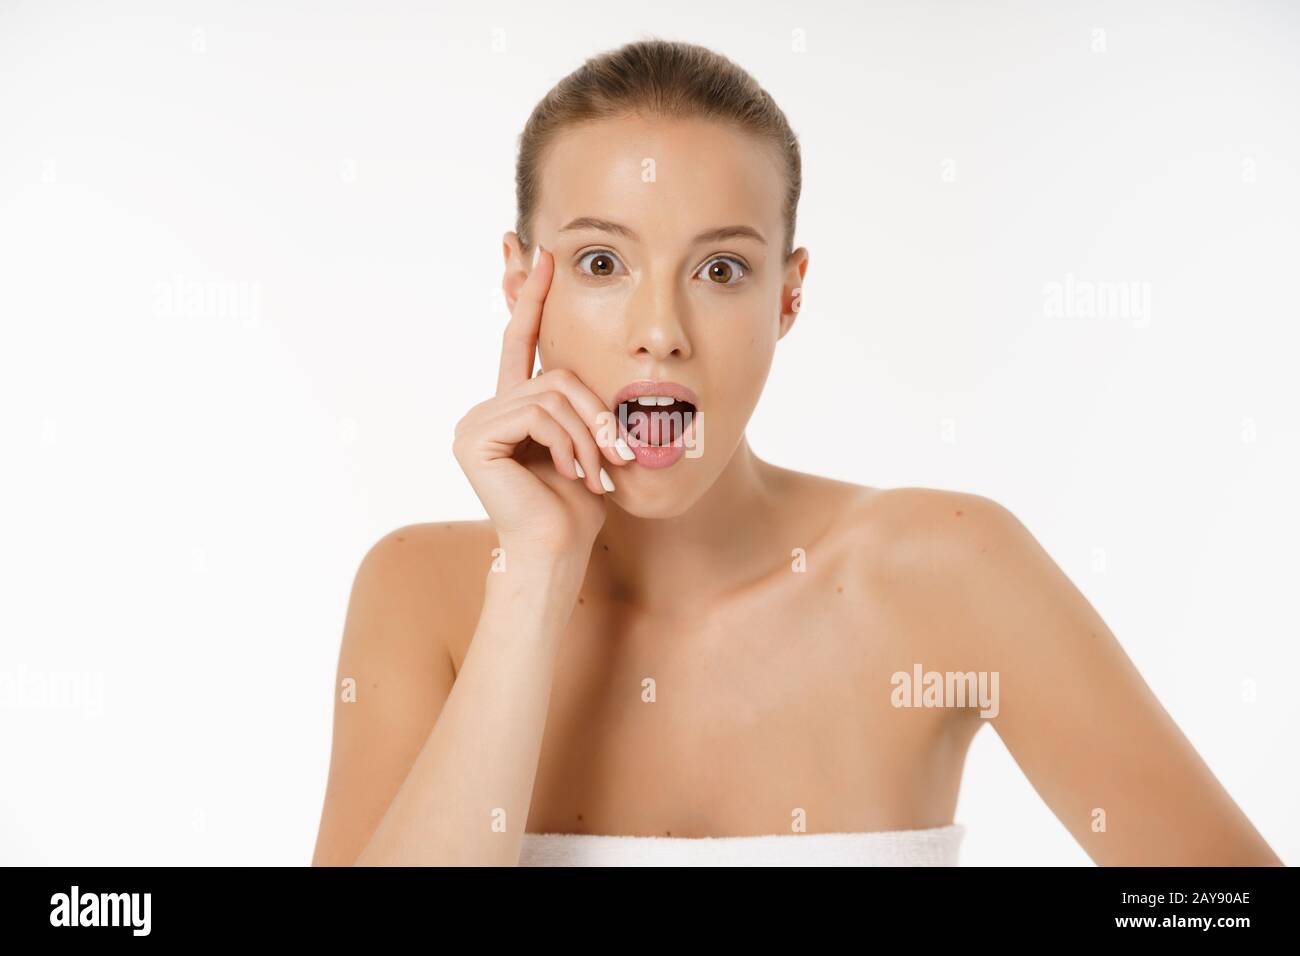 Close-up Of Worried Woman Looking At Pimple On Face Stock Photo